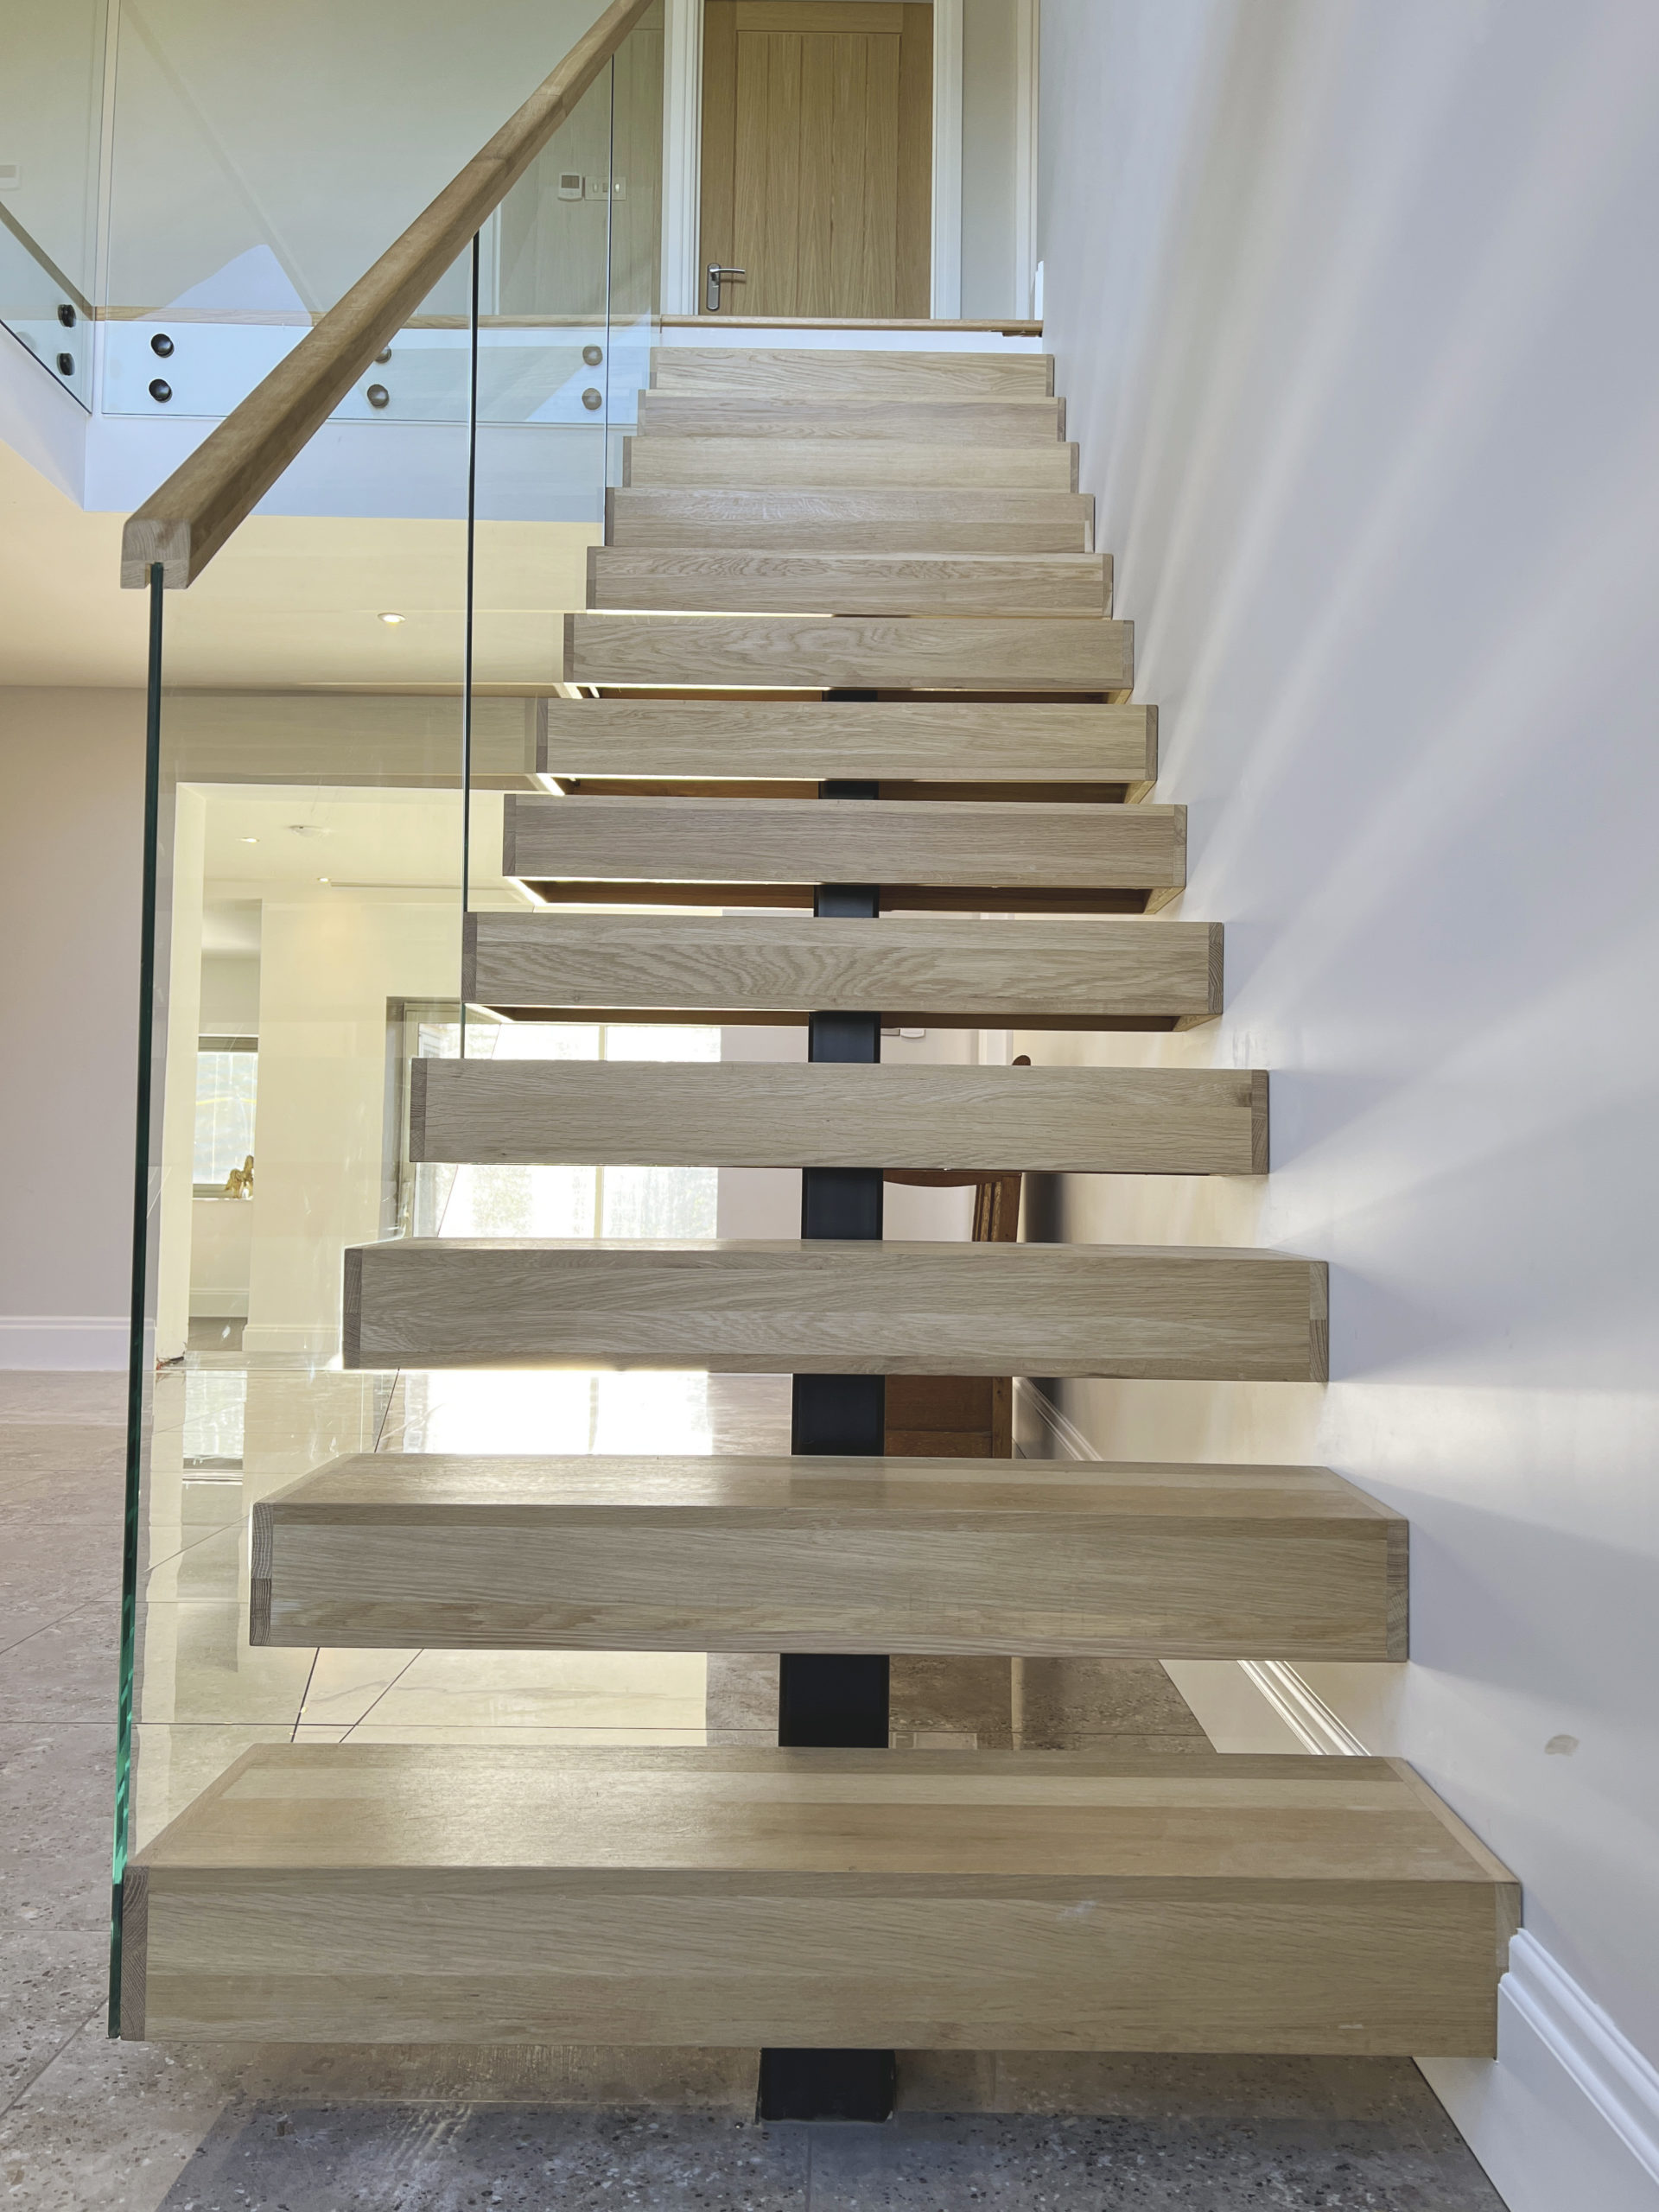 spine staircase with bolted glass balustrades